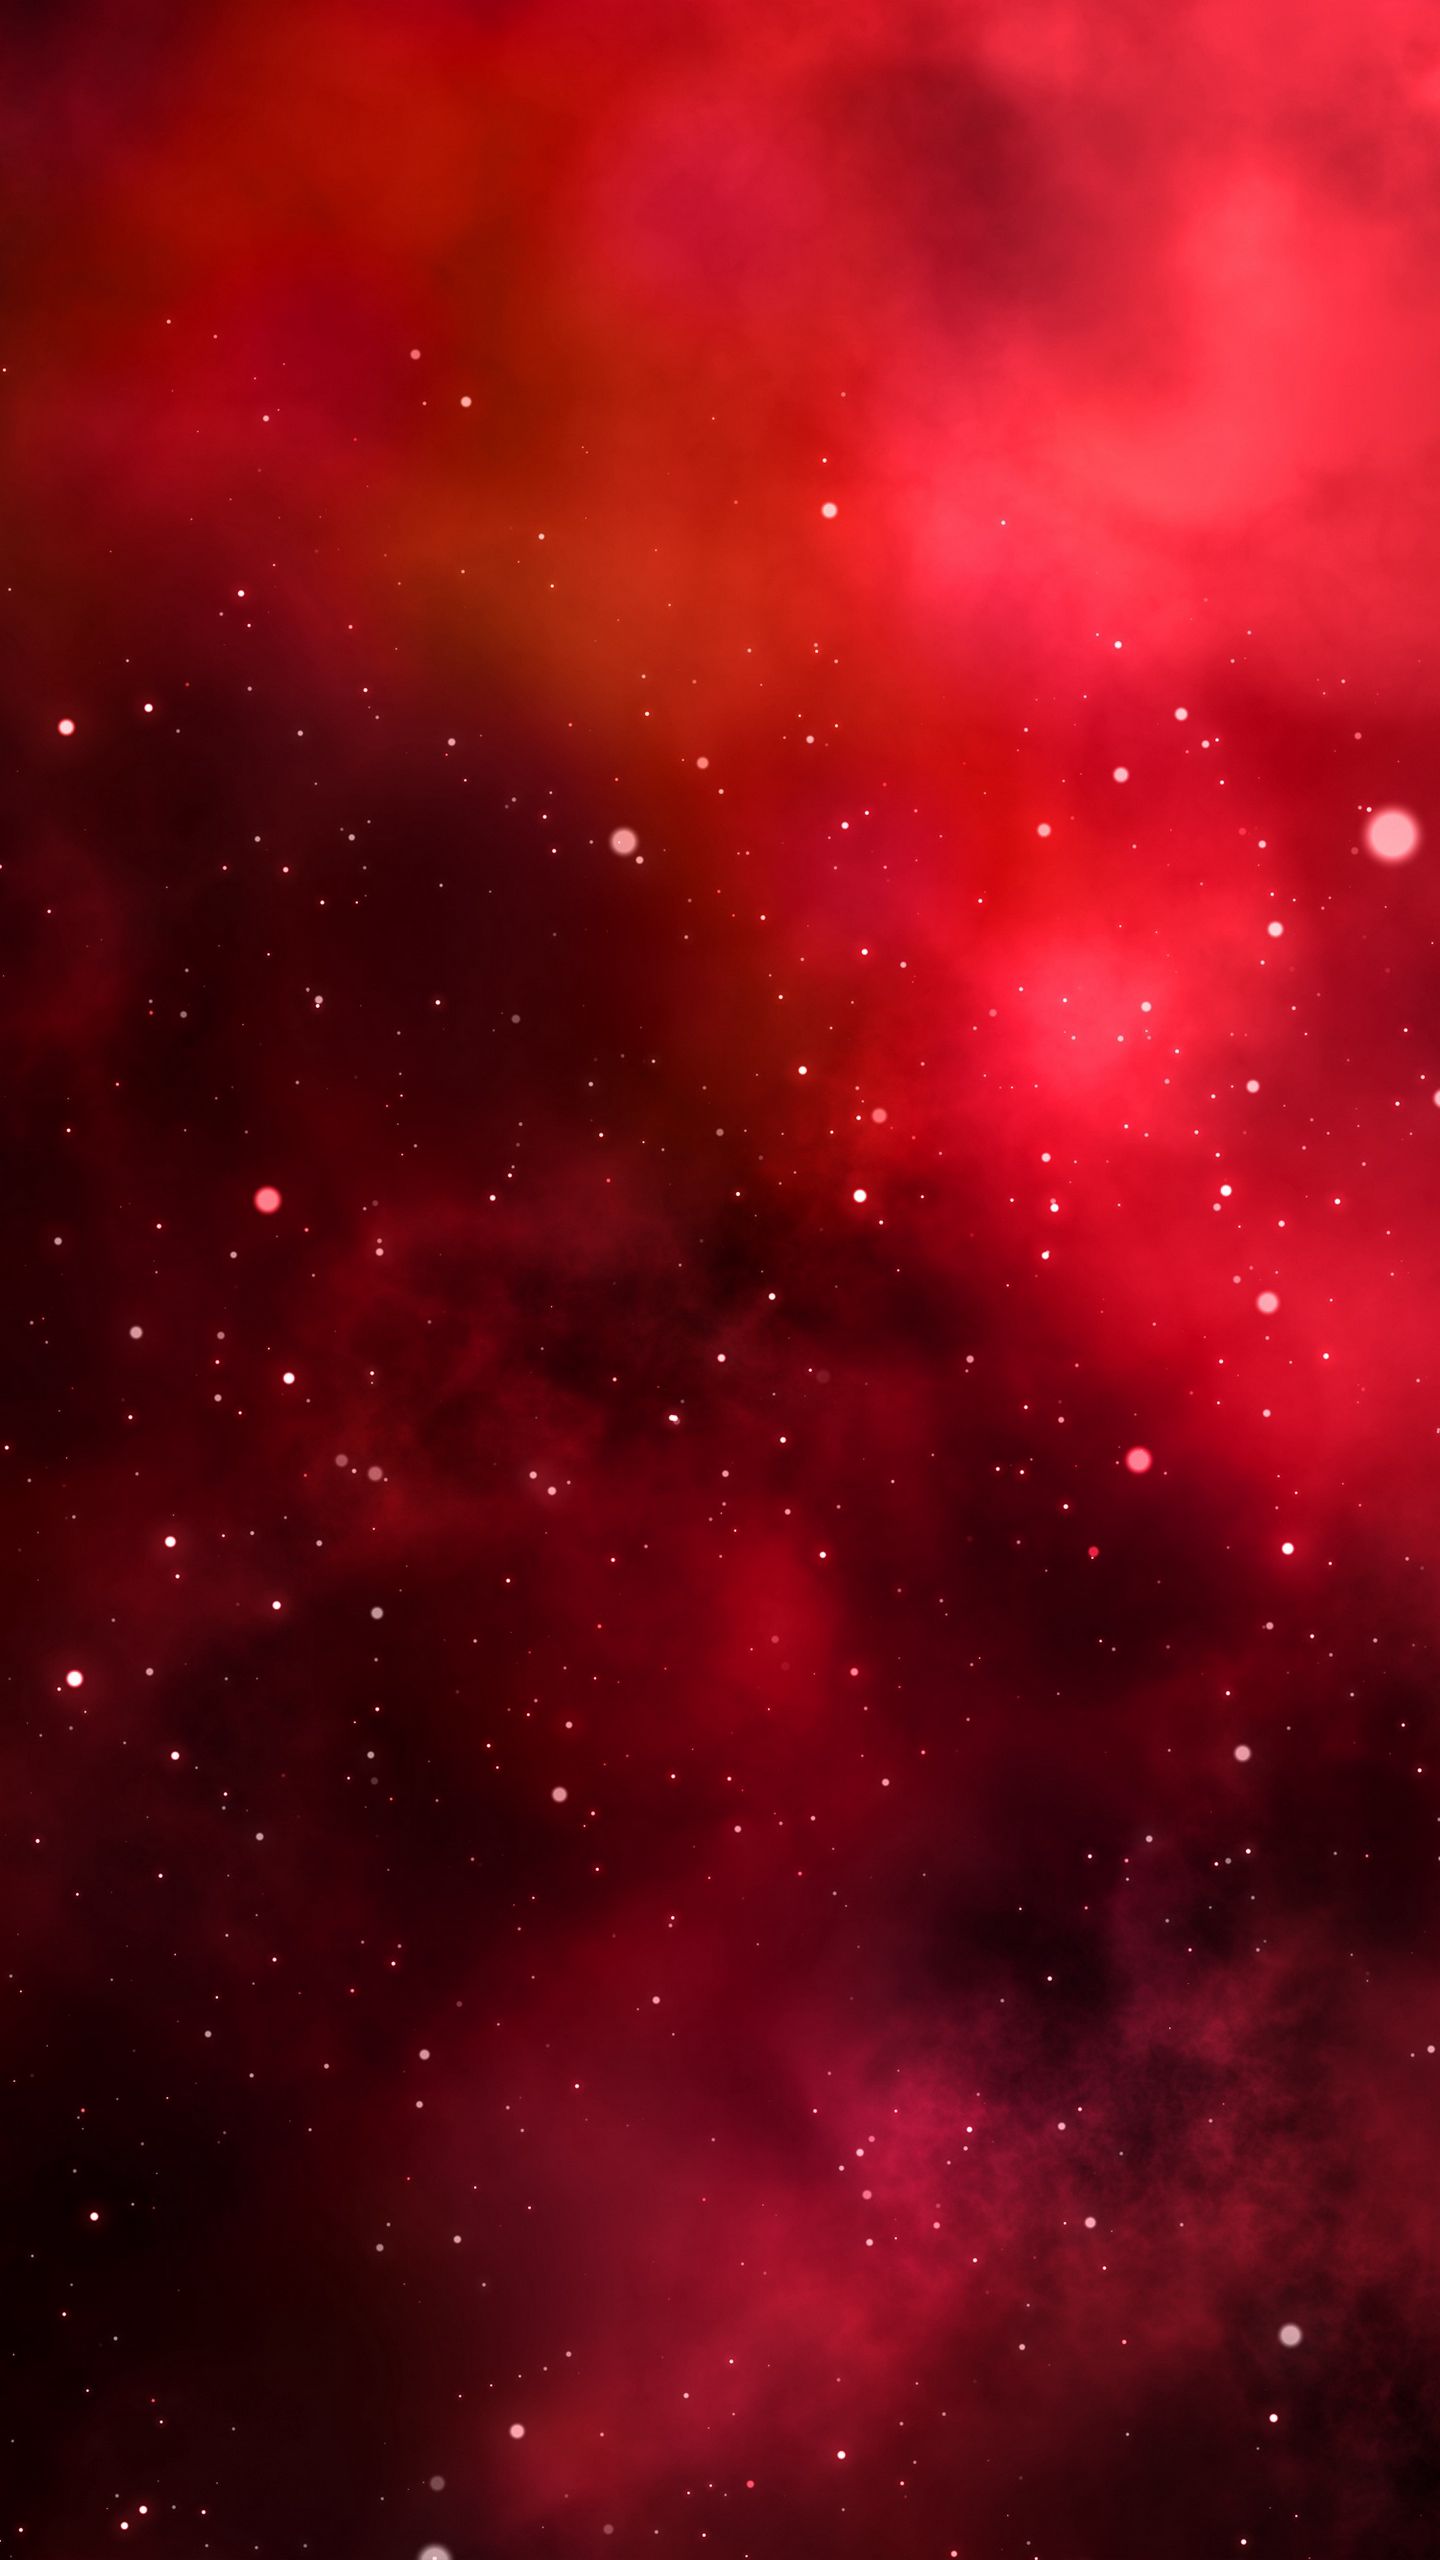 Download Wallpaper 1440x2560 Galaxy Space Red Shine Universe Qhd Samsung Galaxy S6 S7 Edge Note Lg G4 Hd Background